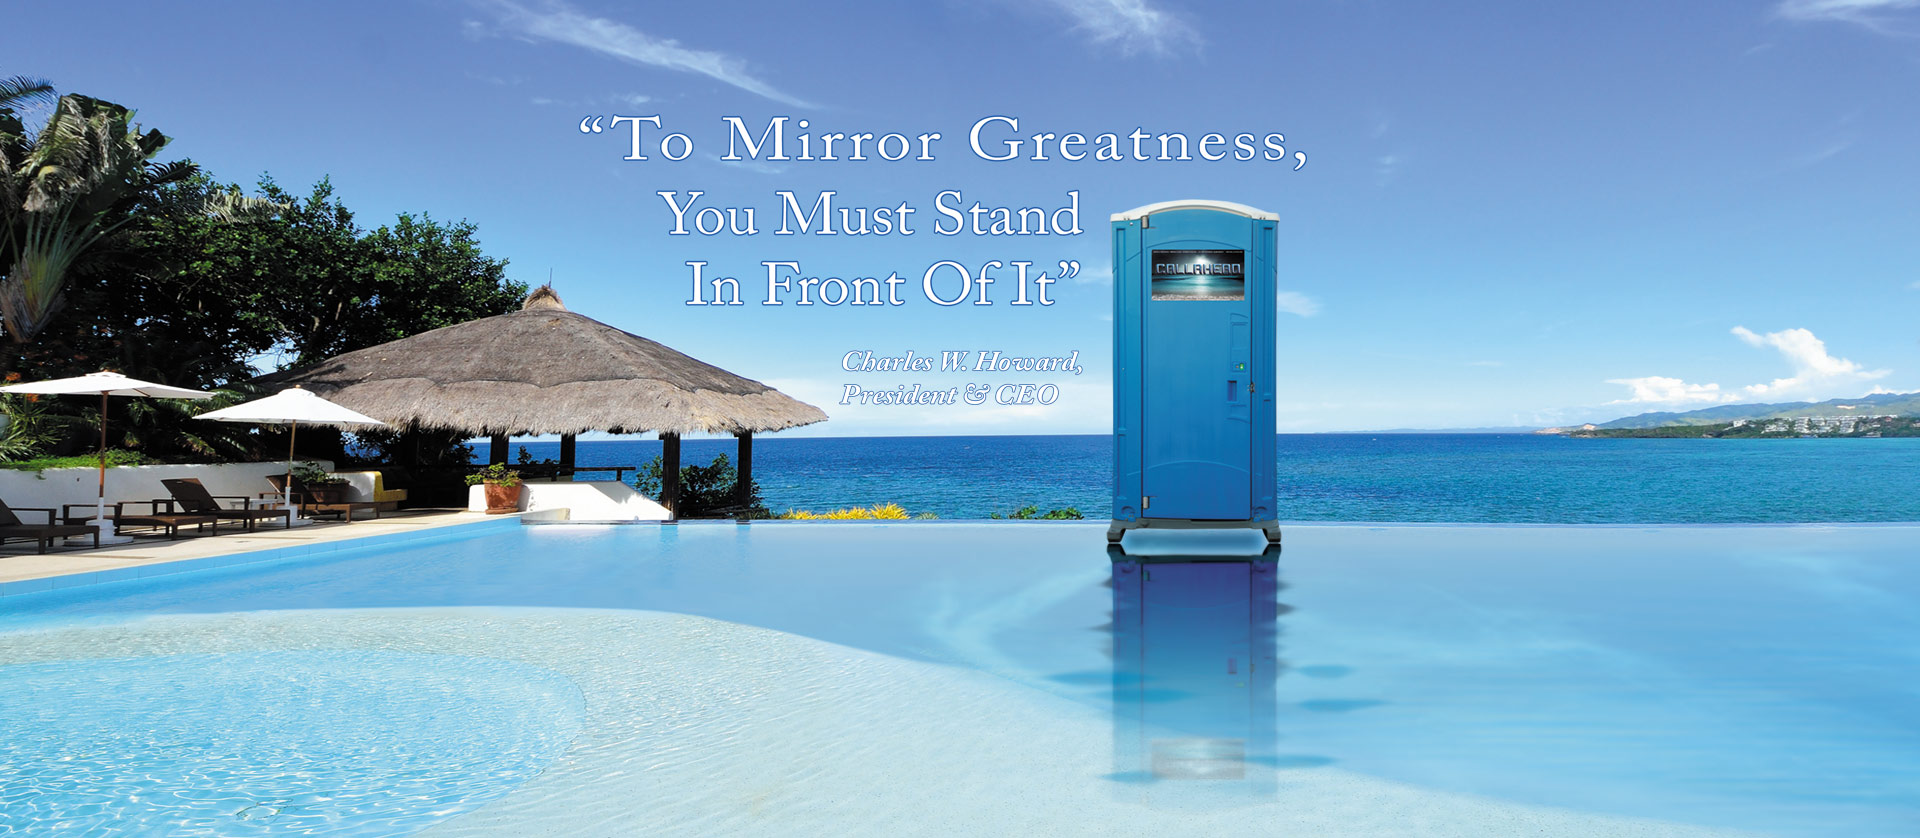 To Mirror Greatness, You Must Stand In Front Of It - Charles W. Howard, President and CEO